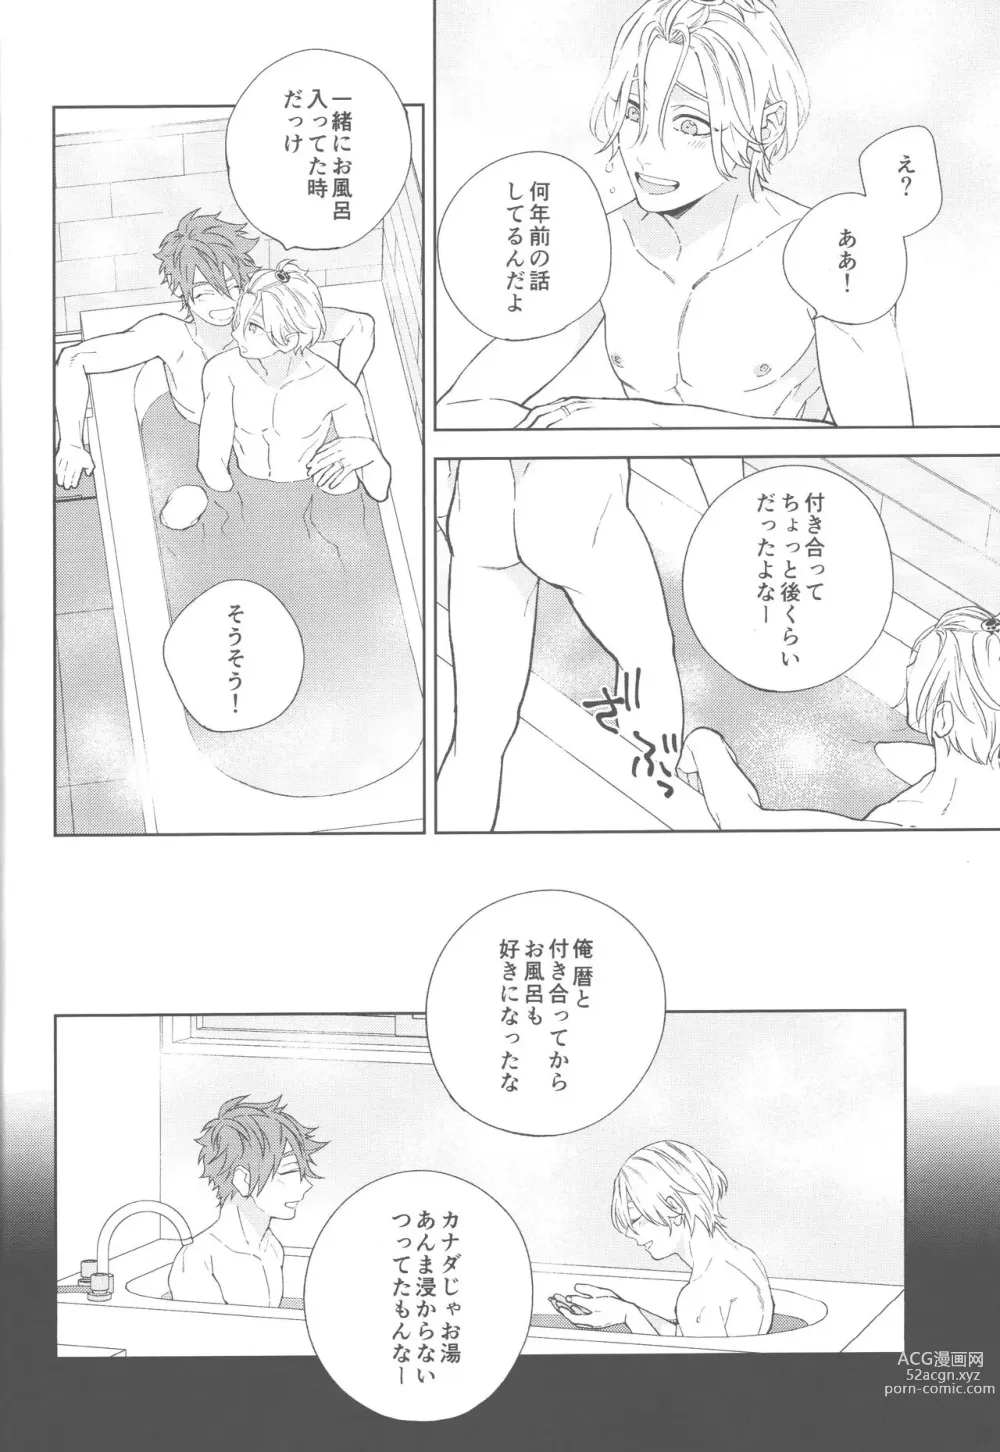 Page 5 of doujinshi SHAVED